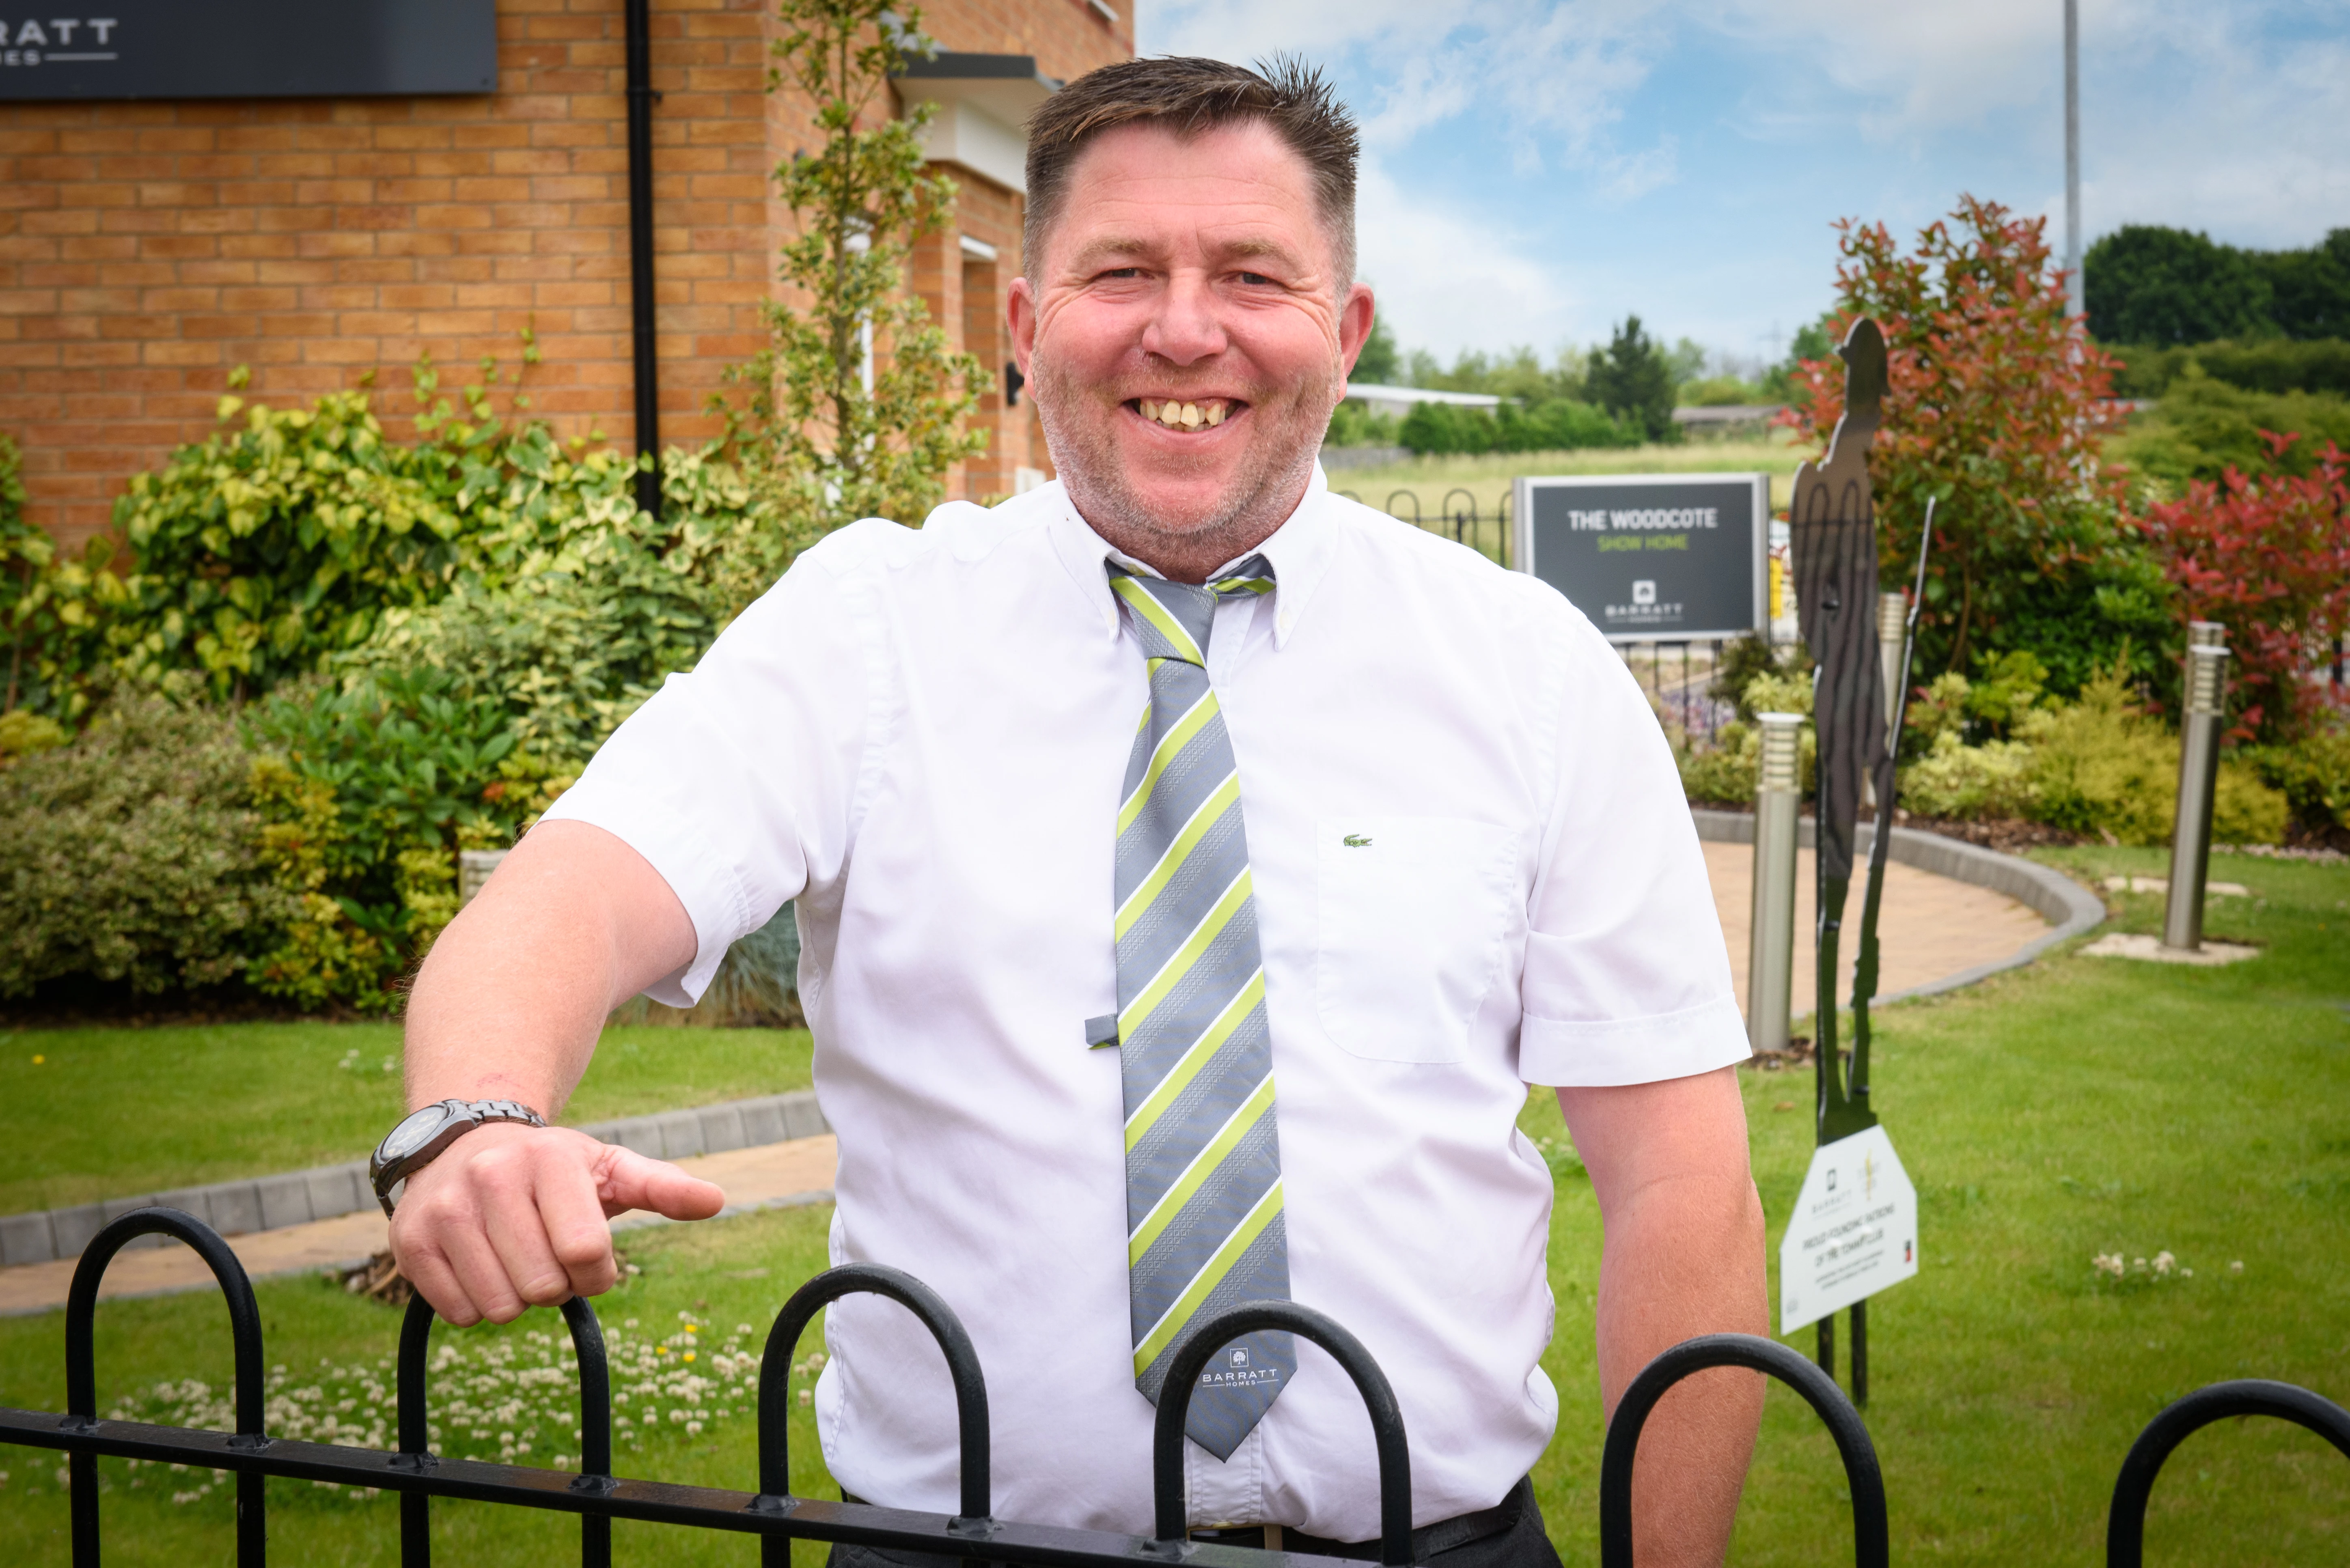 Ade Arnold, Site Manager, Notton Wood View